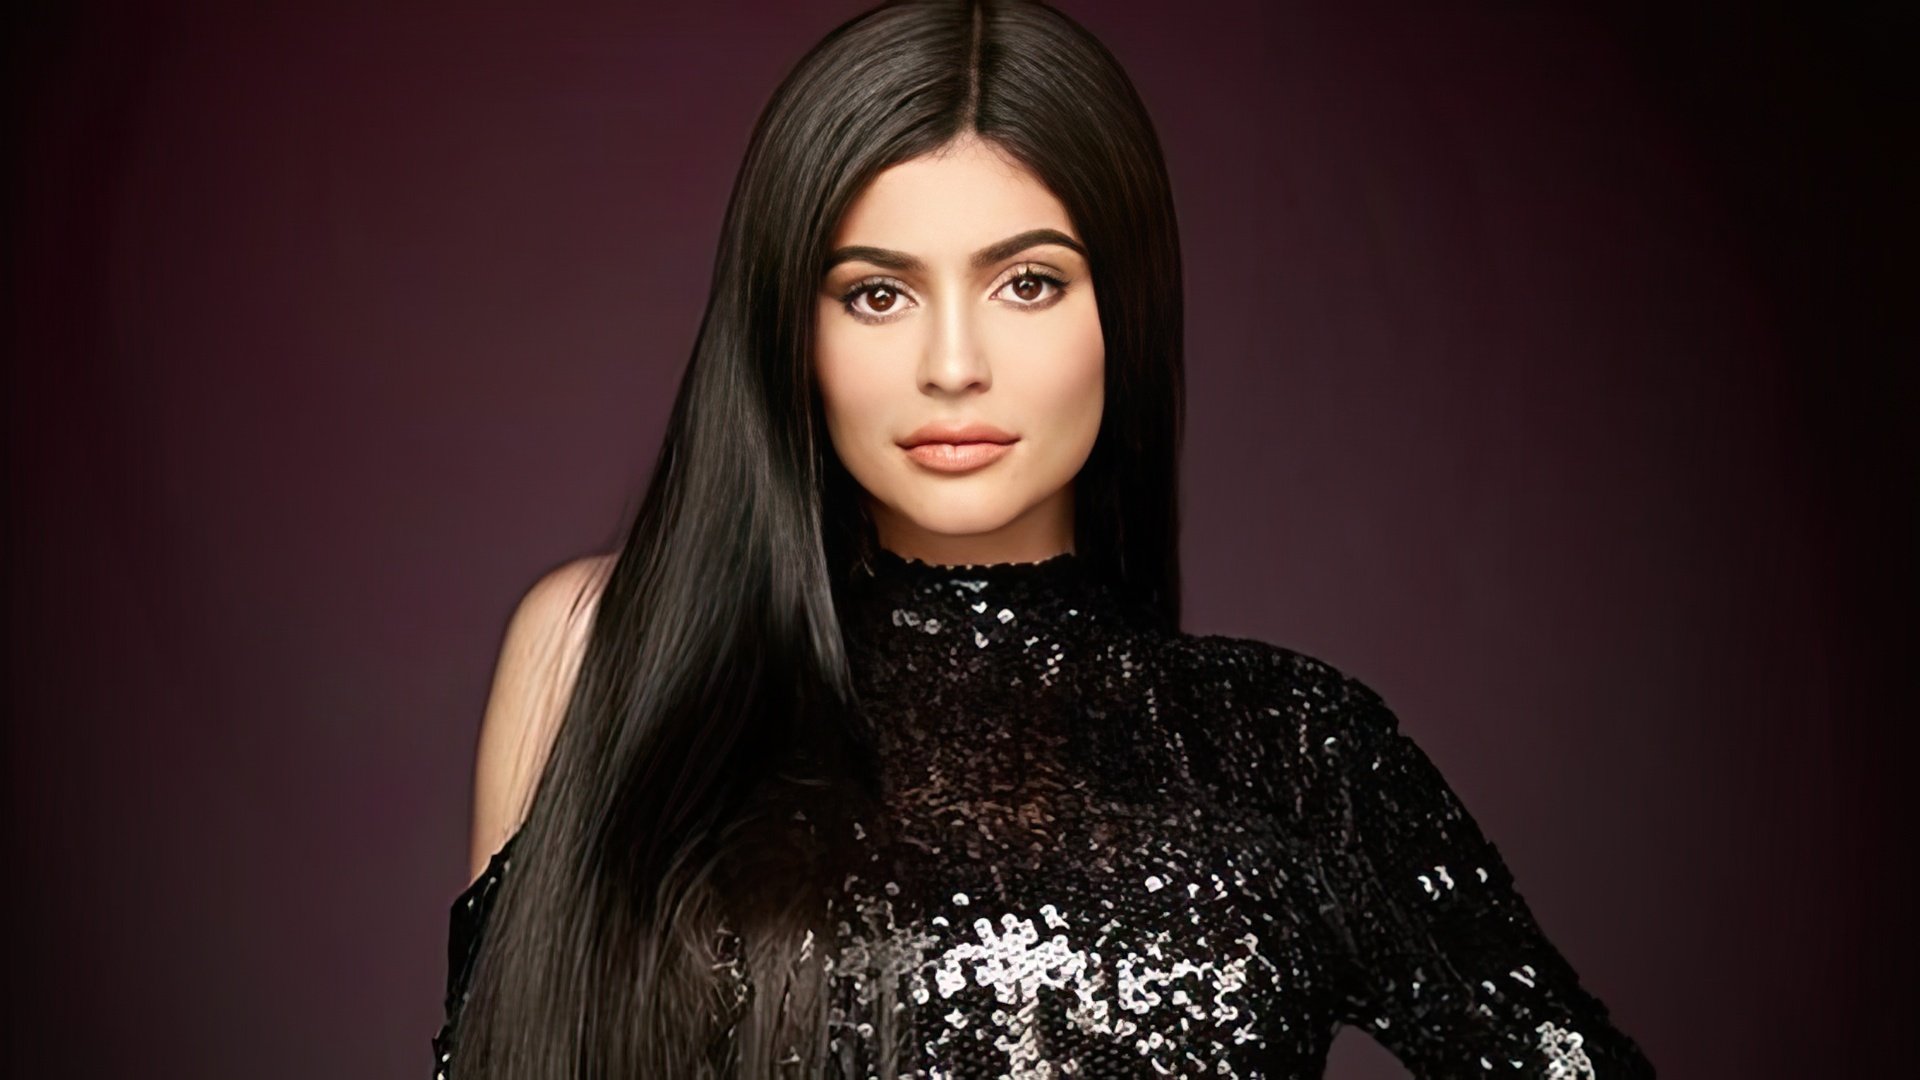 On the photo: Kylie Jenner